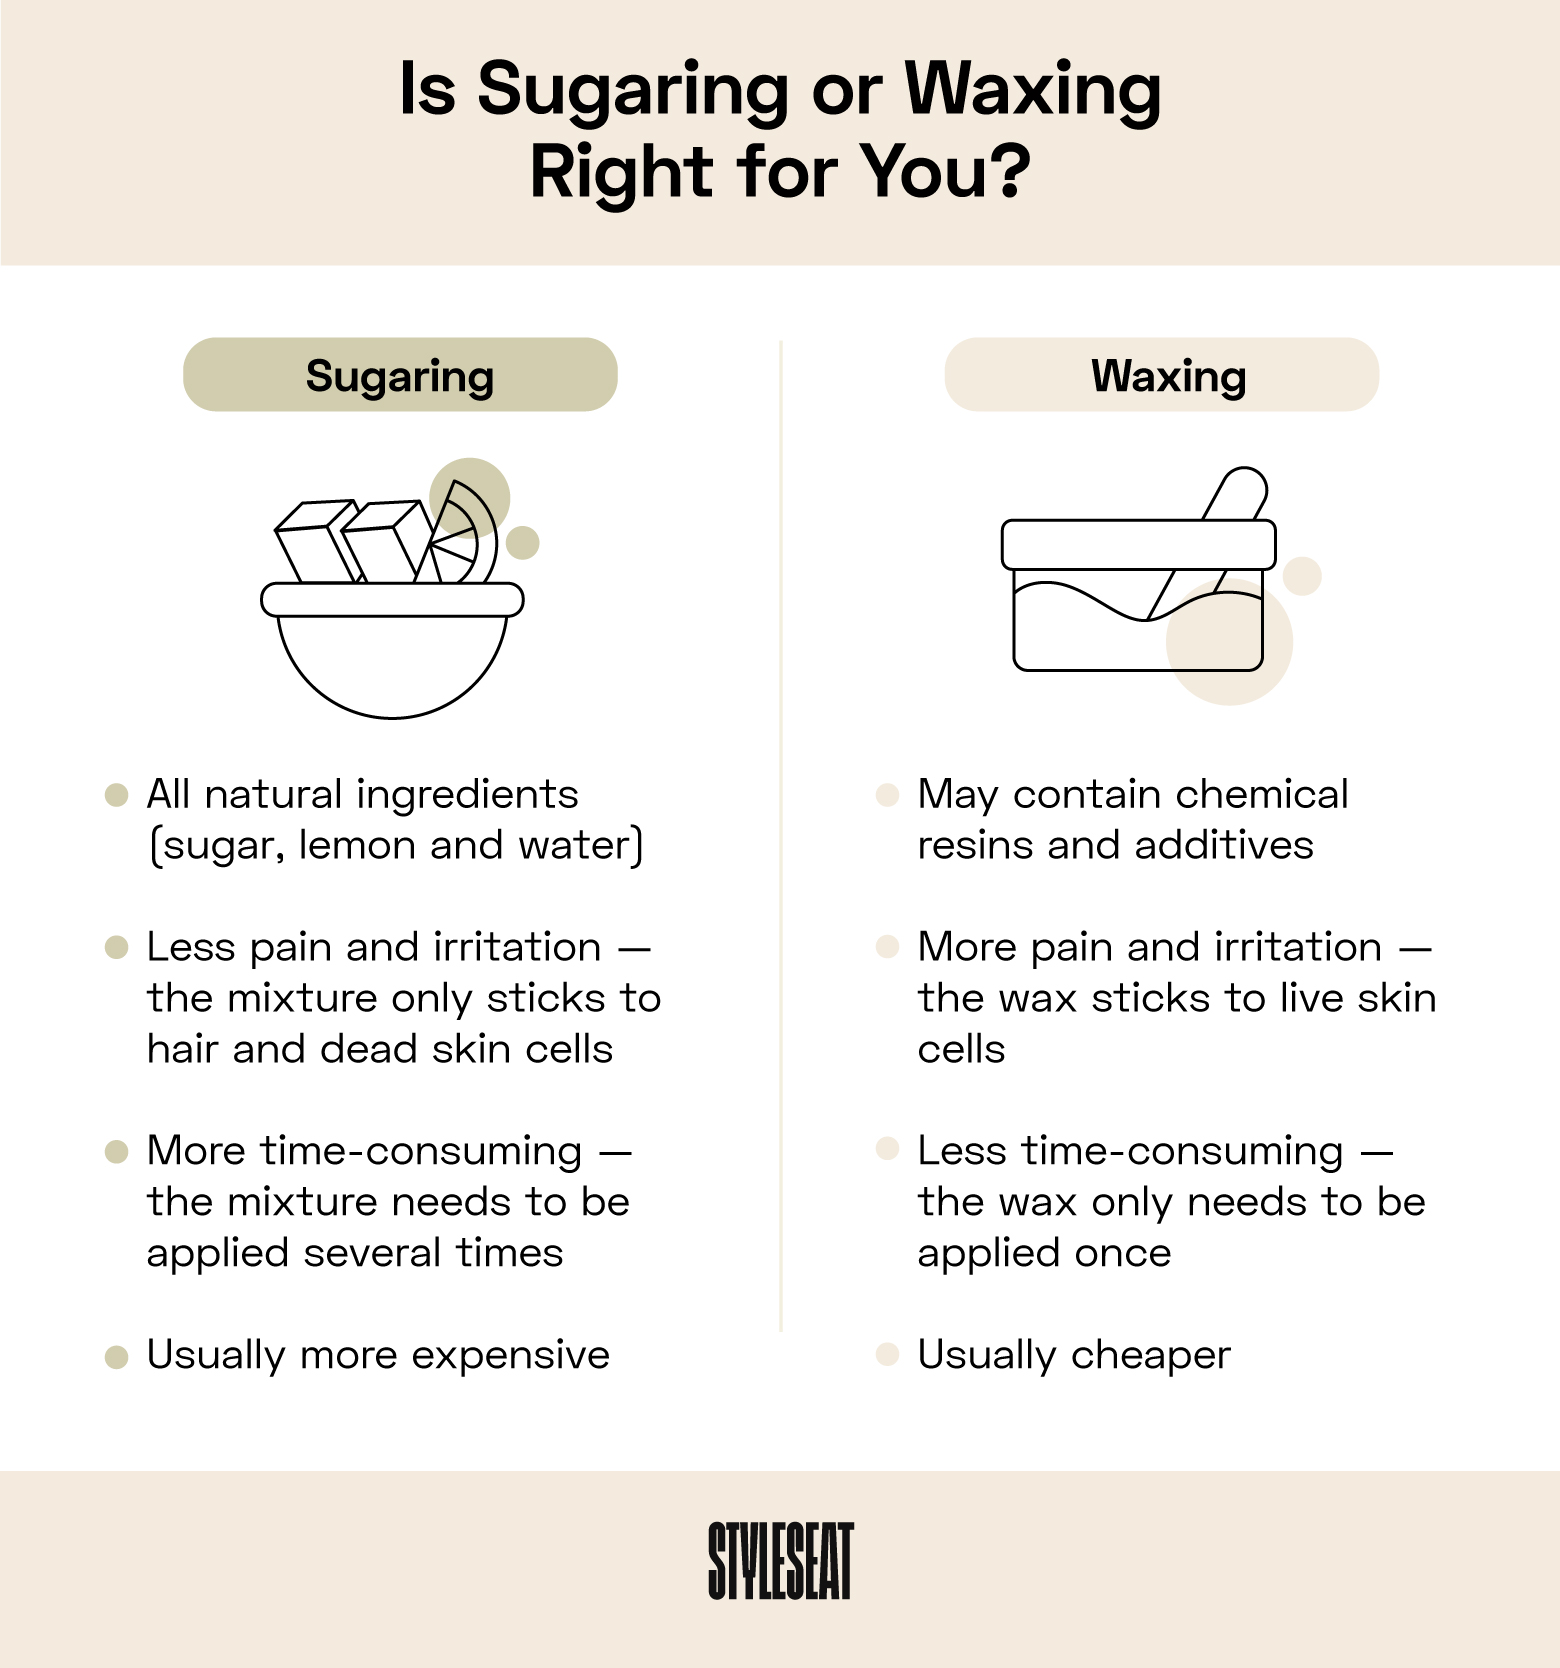 How to choose if sugaring or waxing is right for you